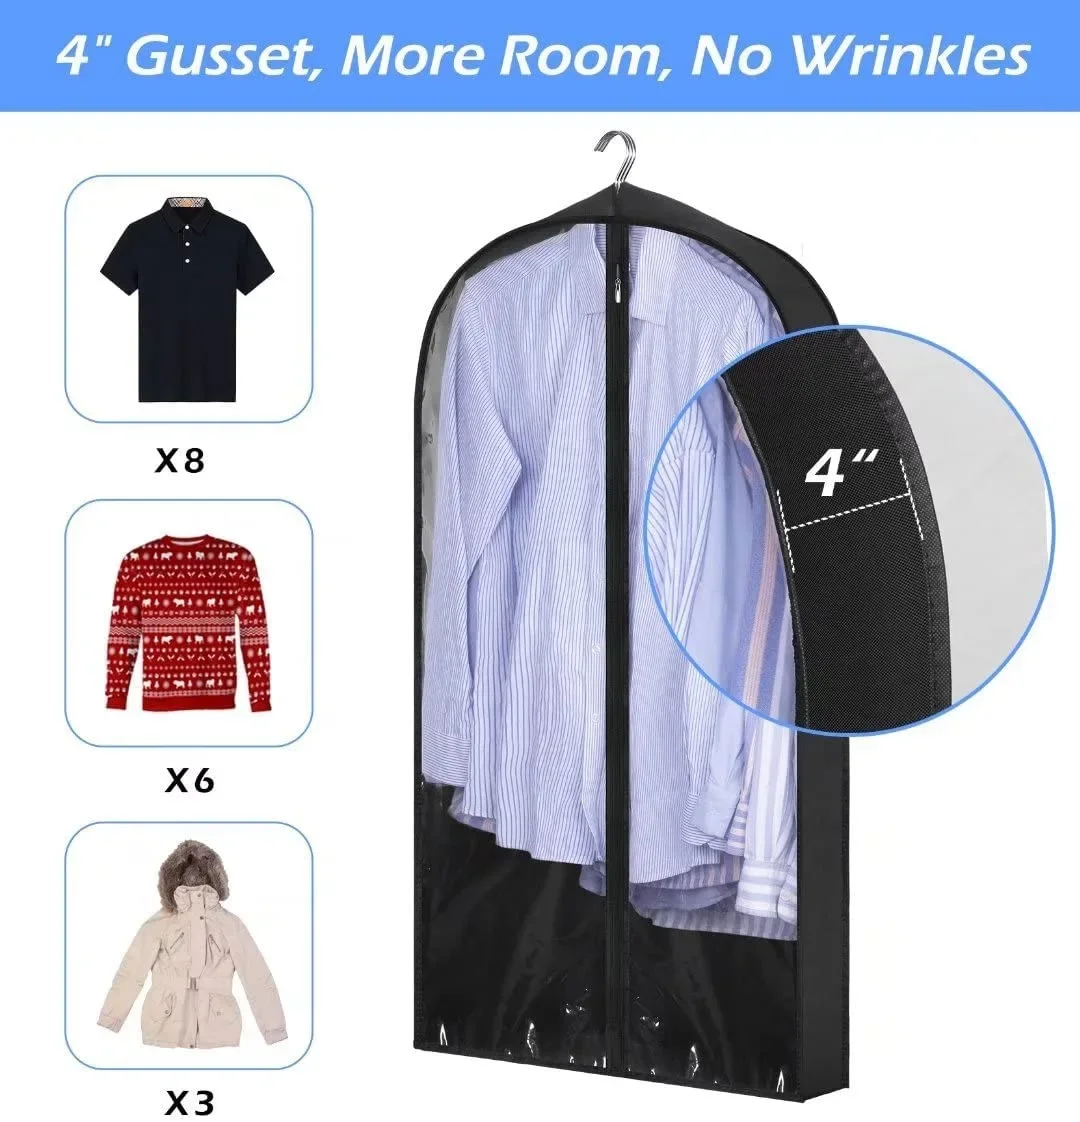 Black Washable Dust Cover Clothes Dust Cover Clothes Storage Hanging Bag Household Transparent Waterproof Kit Cover